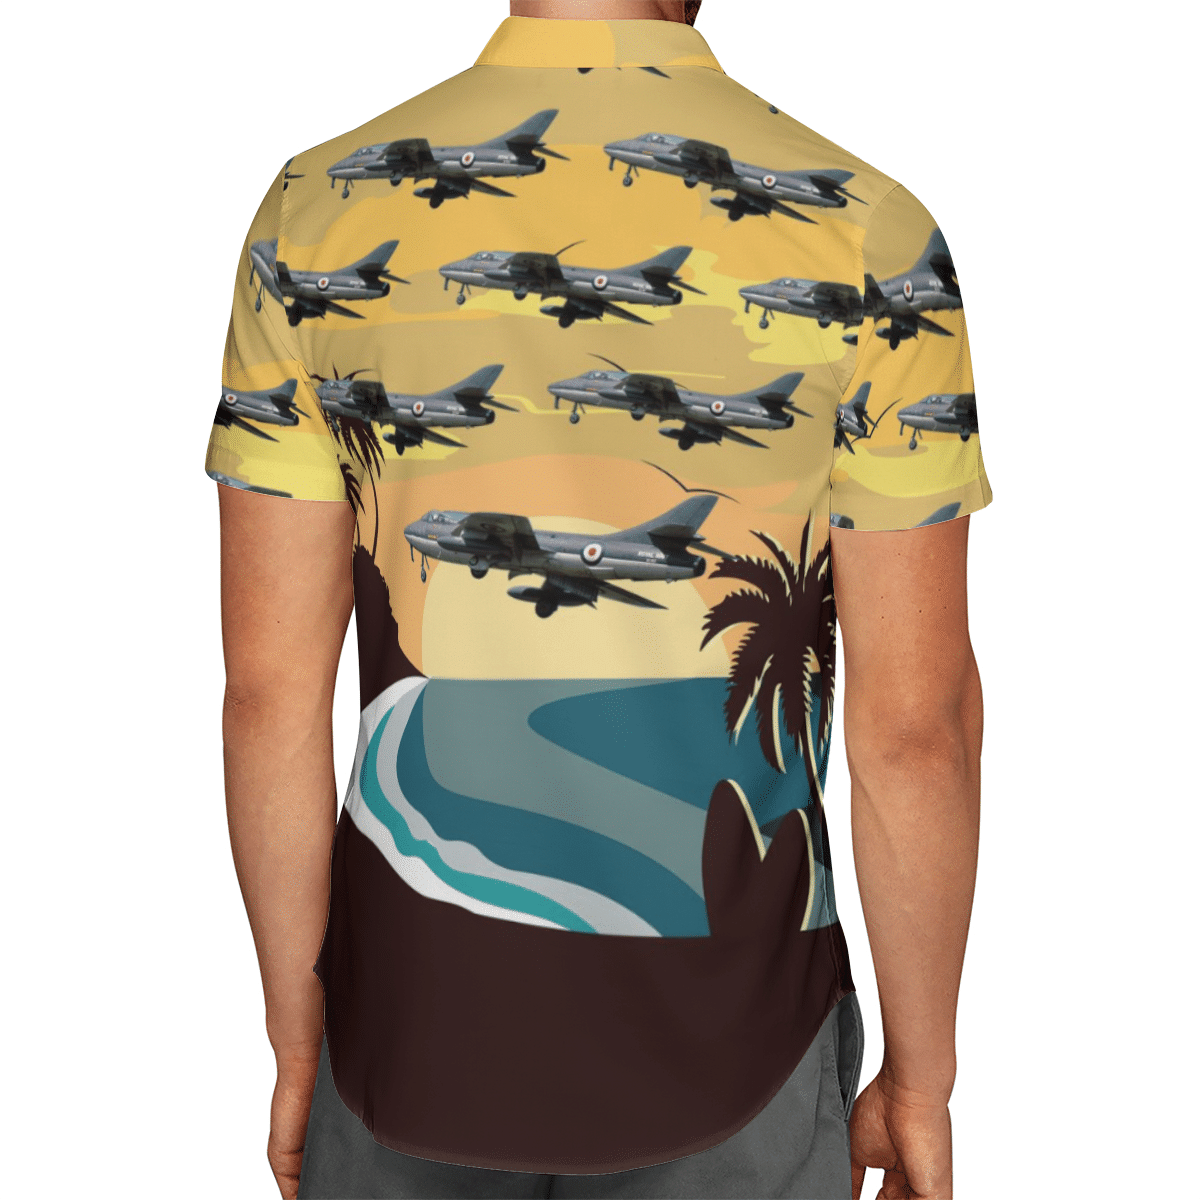 Going to the beach with a quality shirt 127